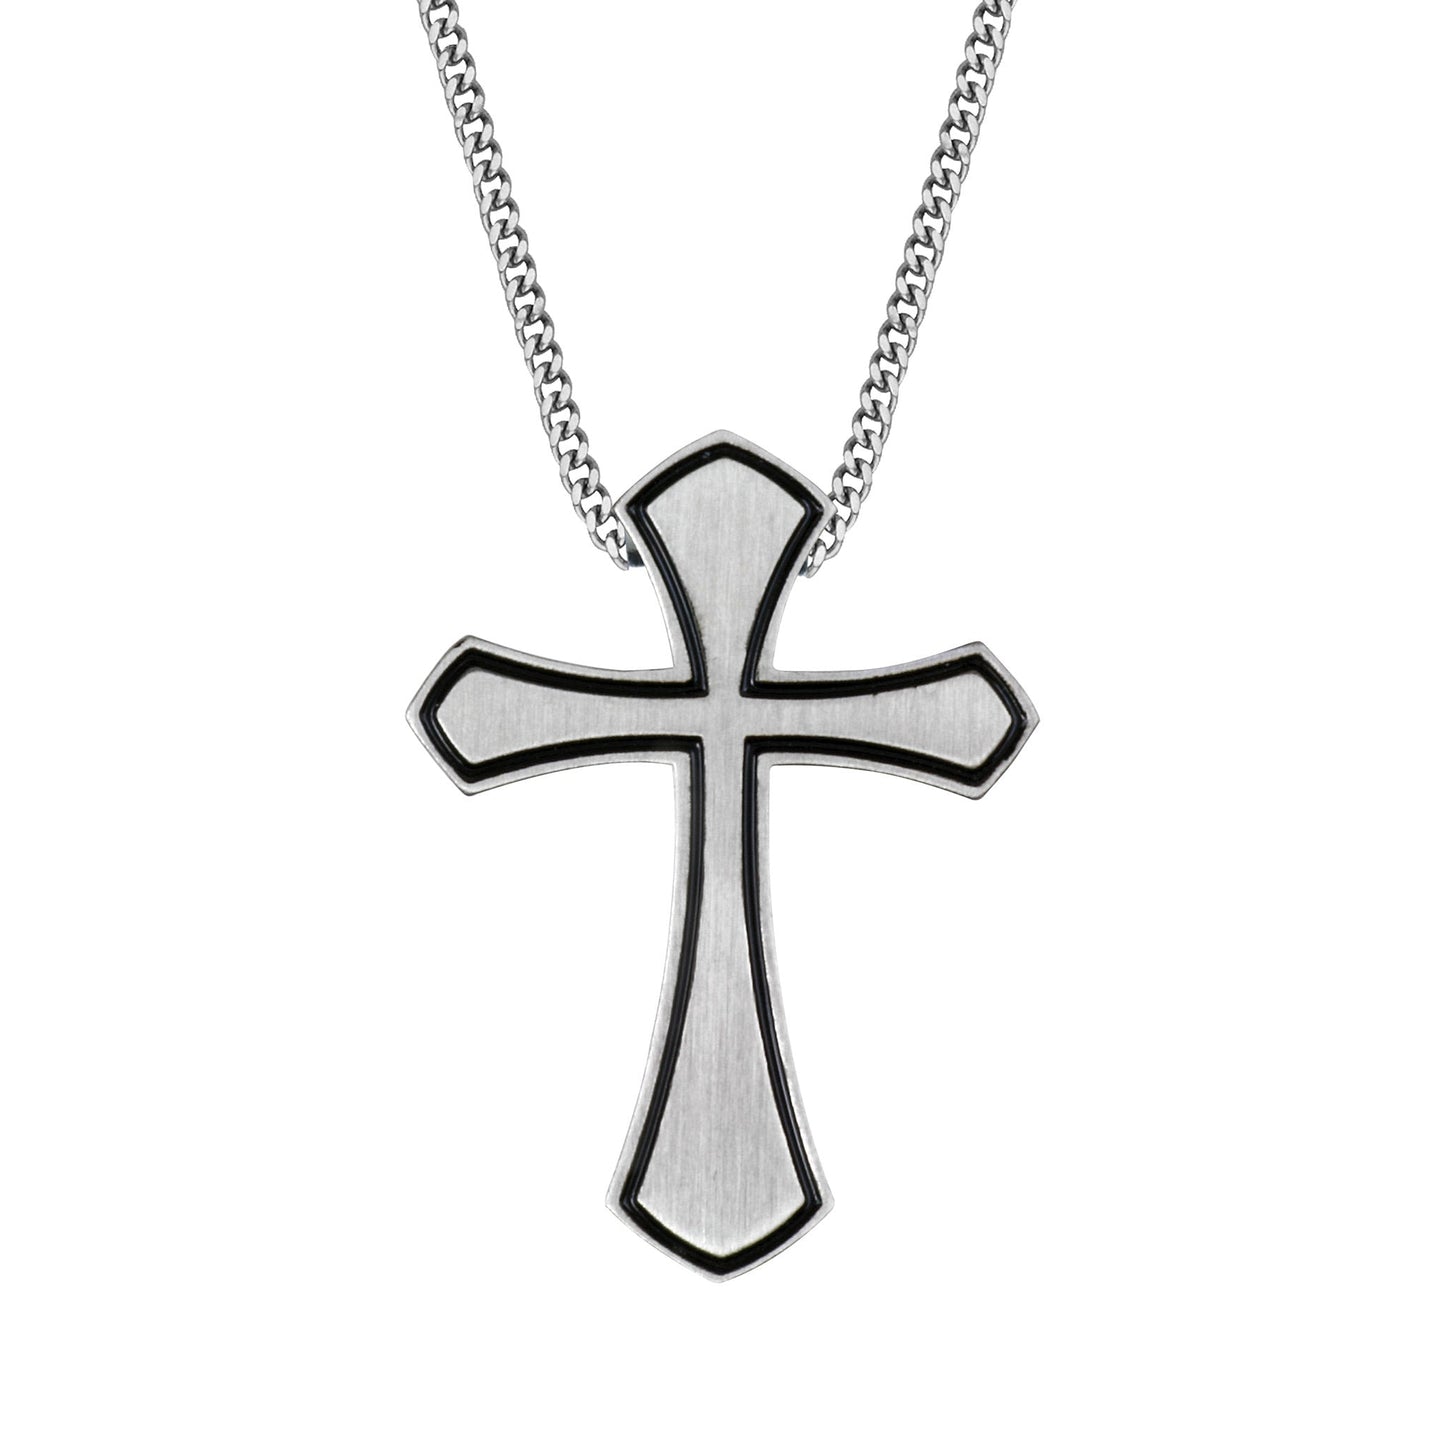 A stainless steel cross with black border accent on 24" chain displayed on a neutral white background.